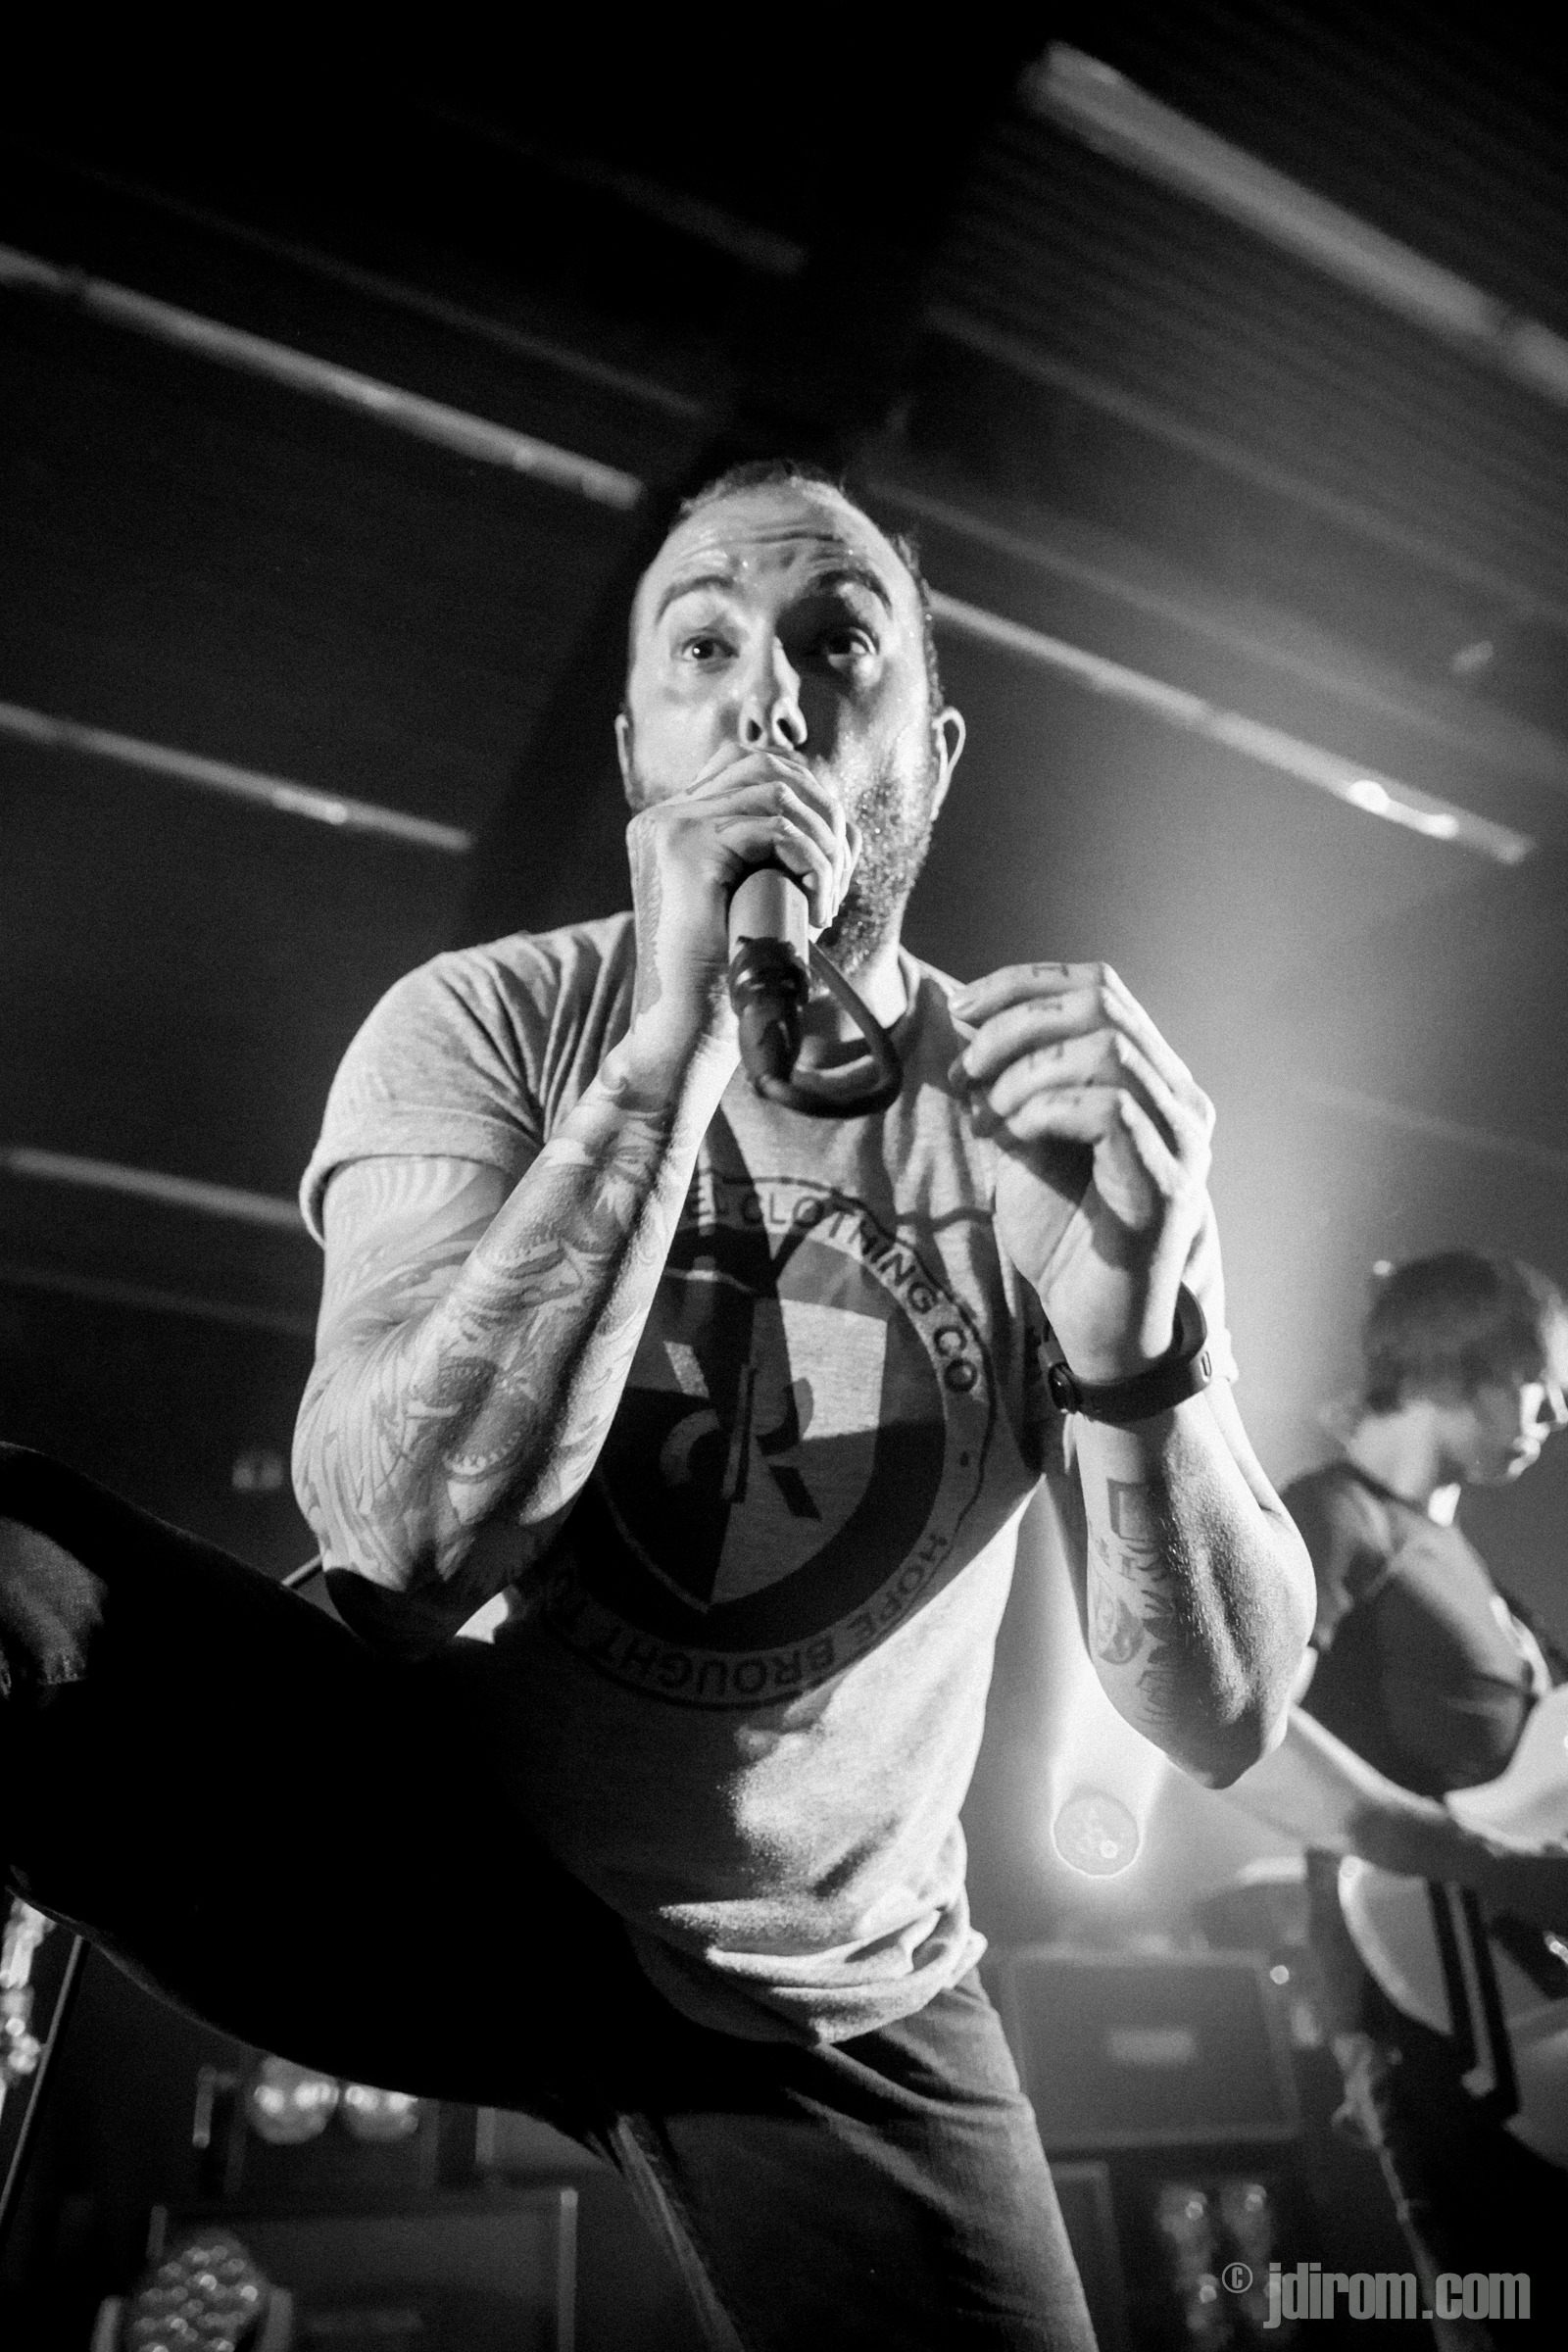 August Burns Red - Frozen Flame Tour - Concert Photography